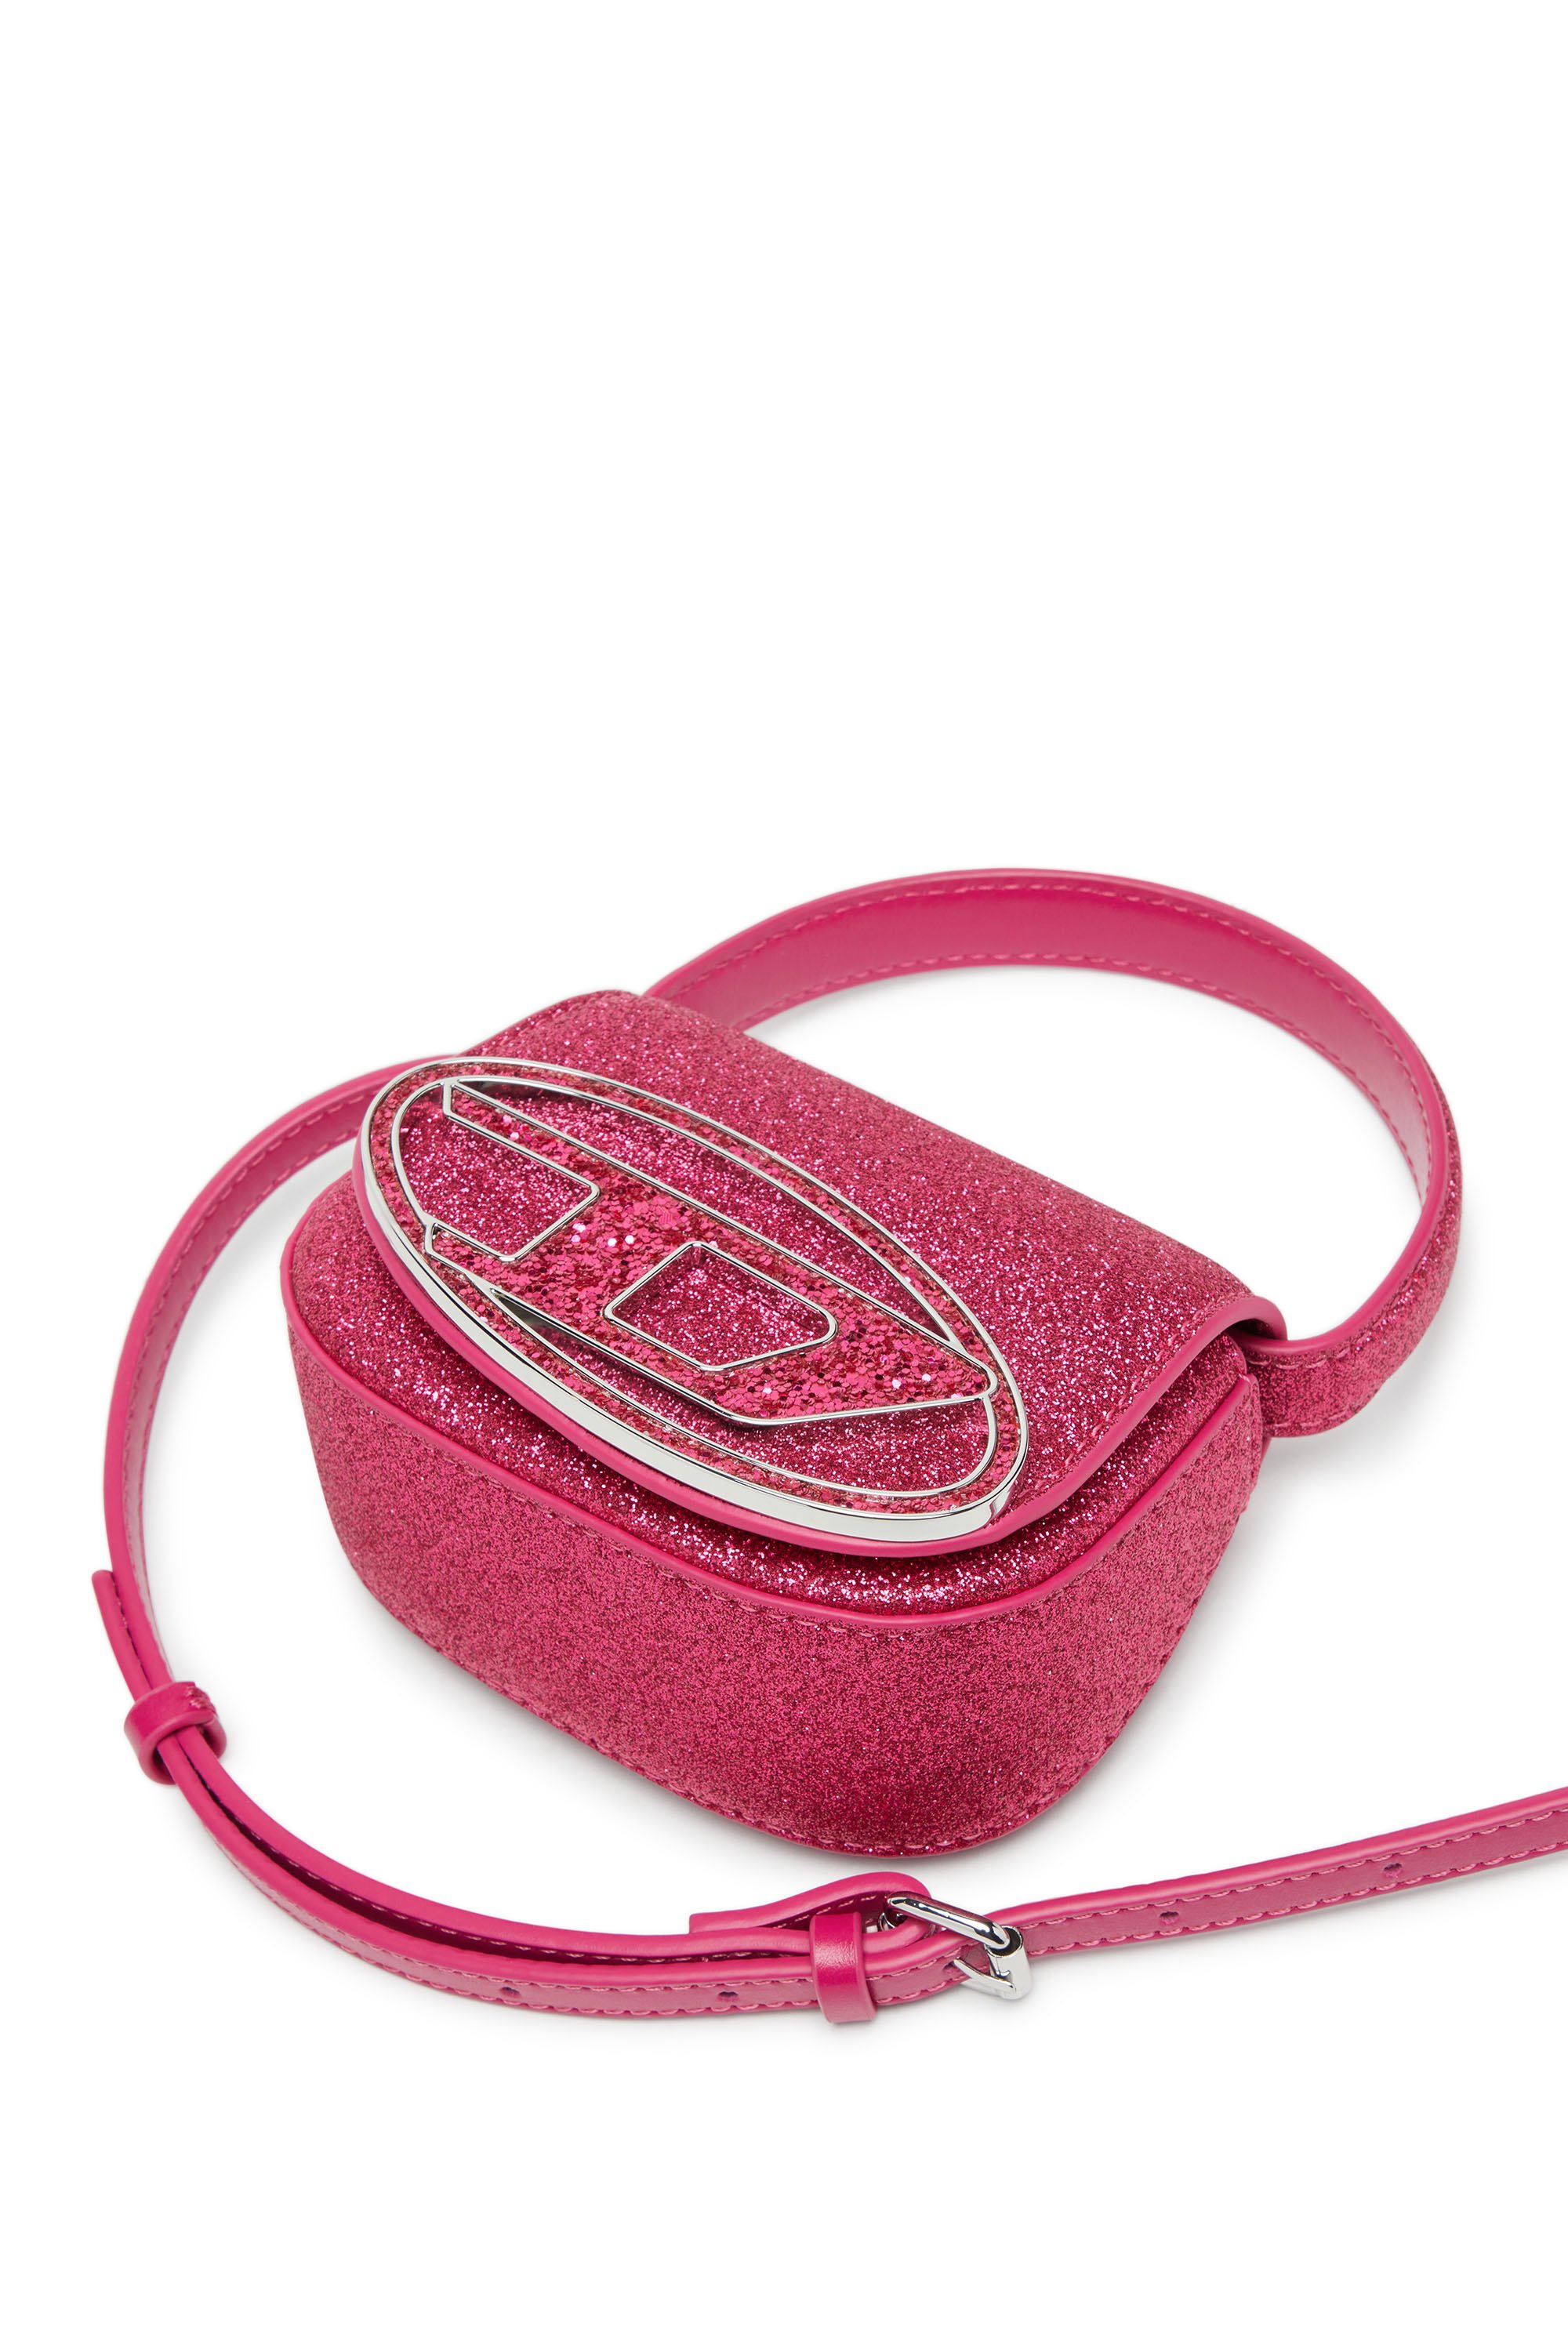 Diesel - 1DR XS, Woman 1DR XS-Iconic mini bag in glitter fabric in Pink - Image 2